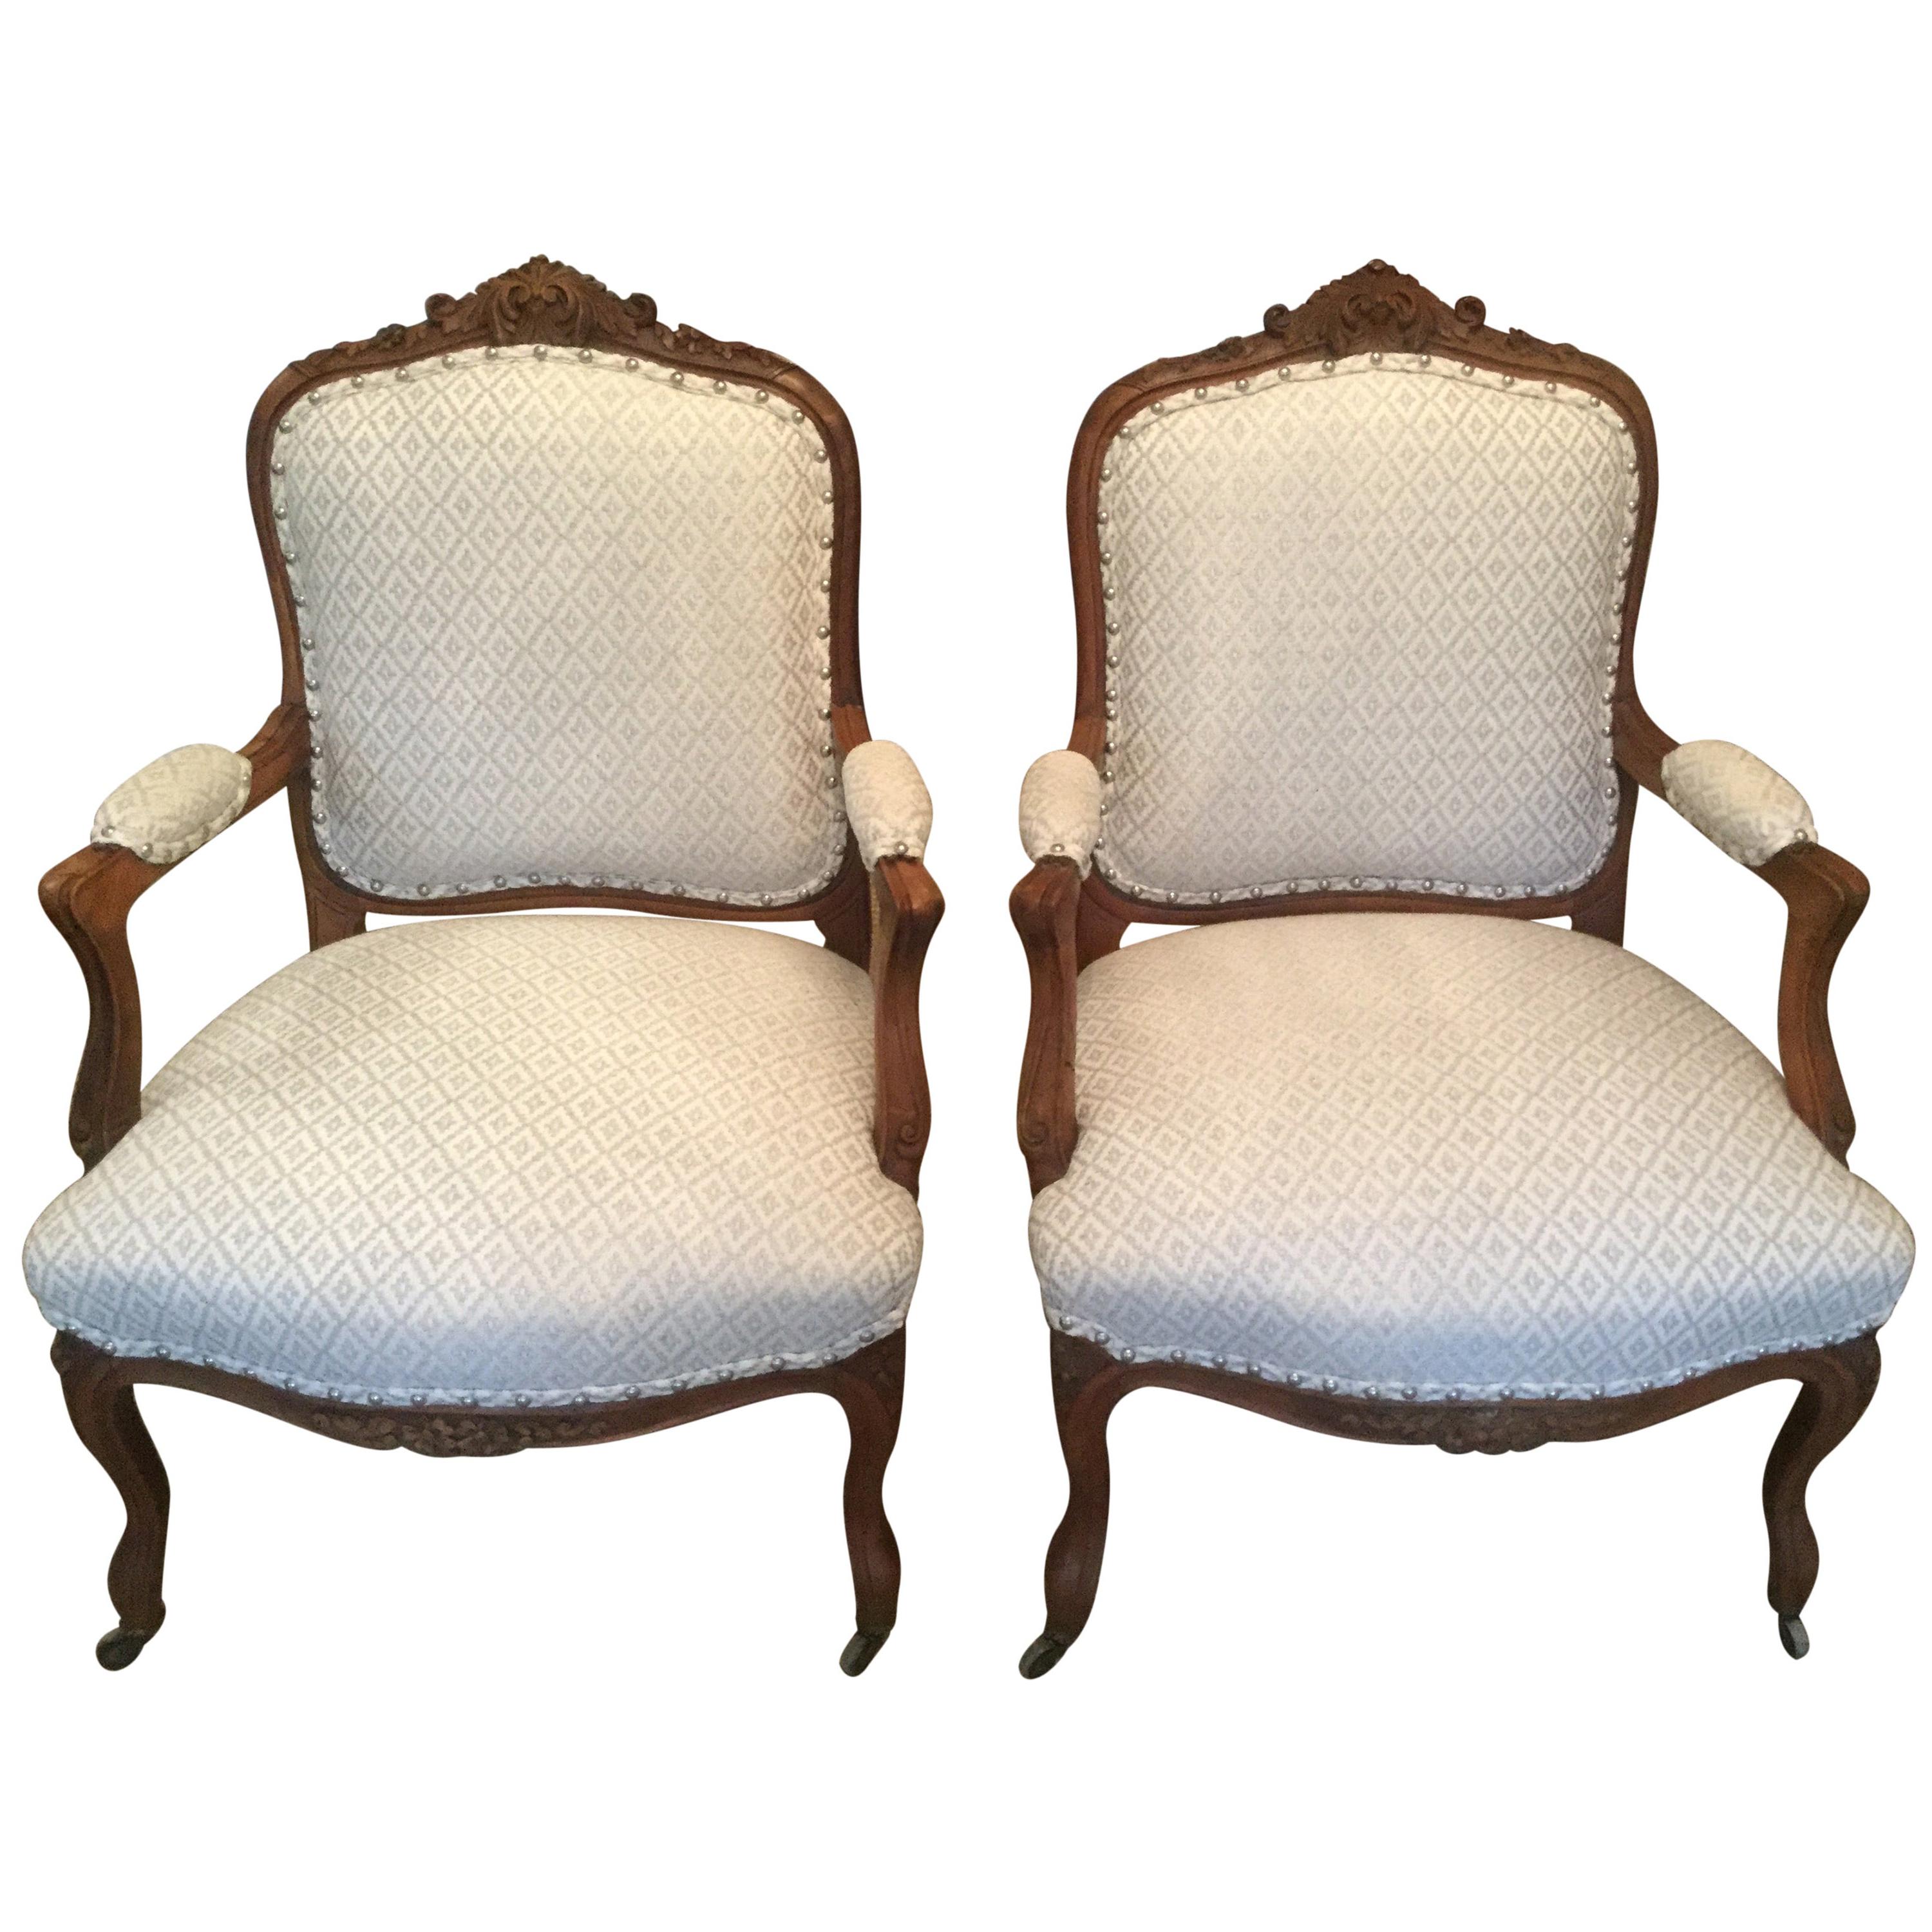 Pair of 19th Century French Carved Walnut Chairs with New Upholstery For Sale